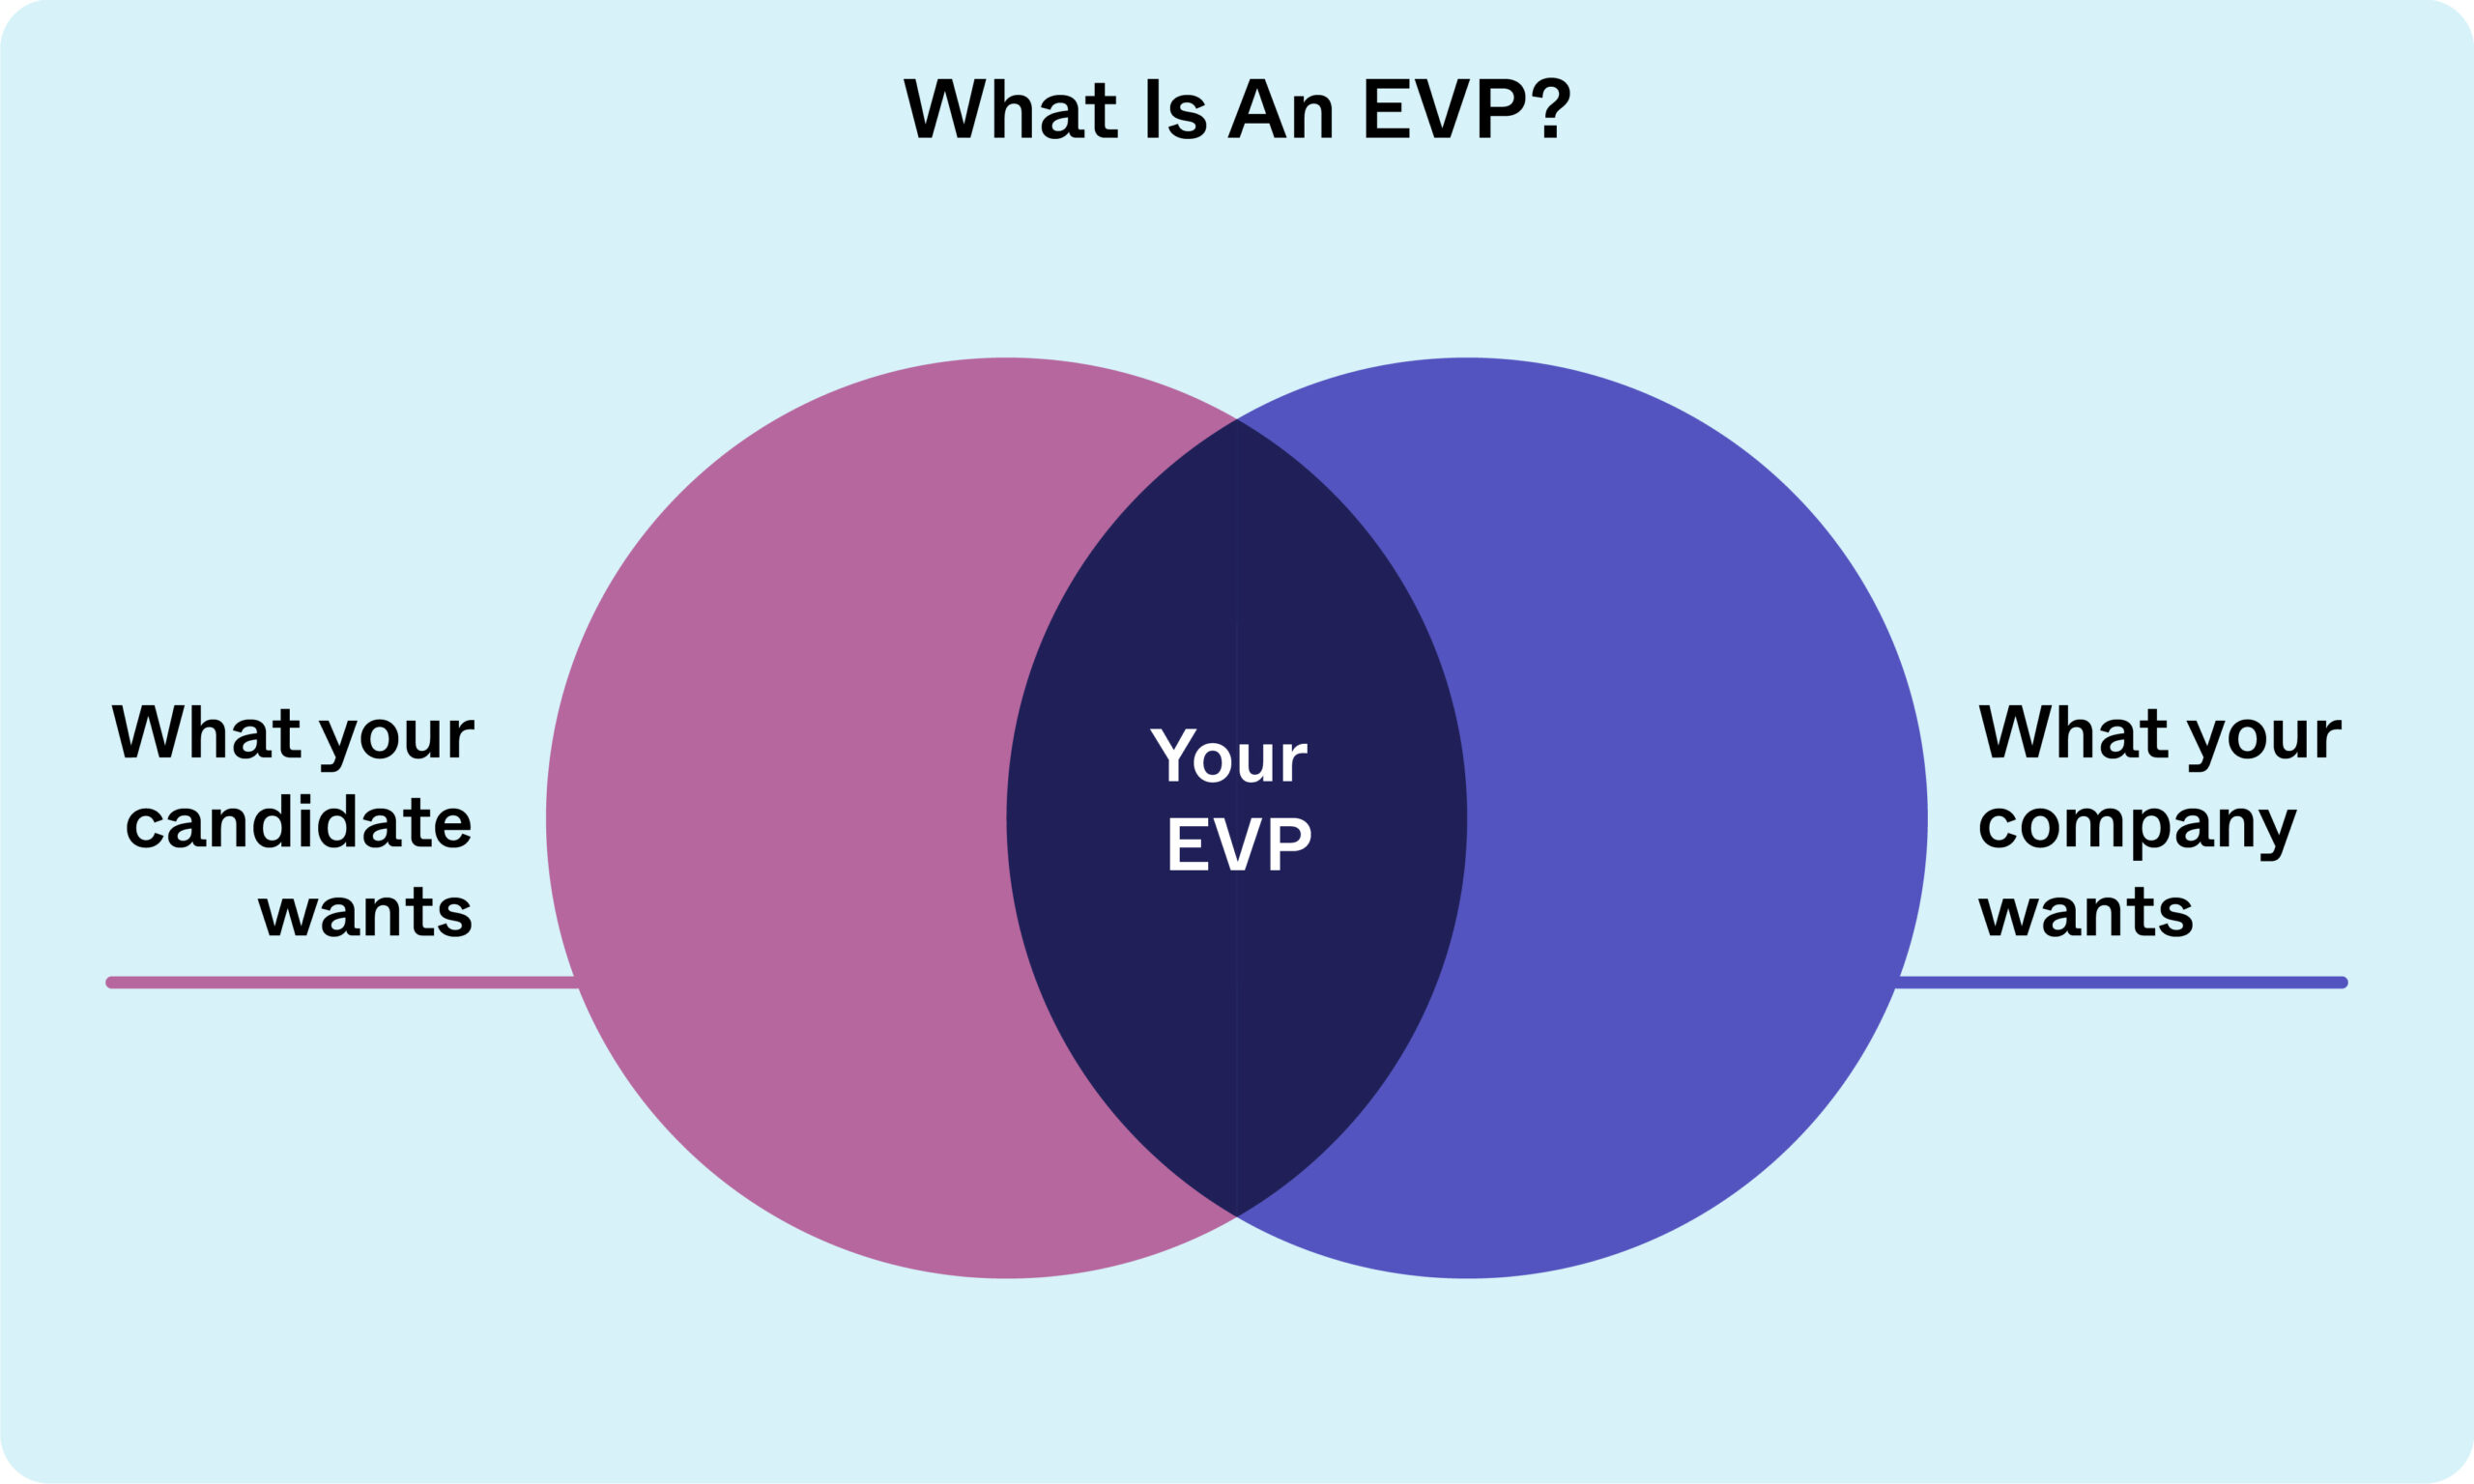 What is an EVP